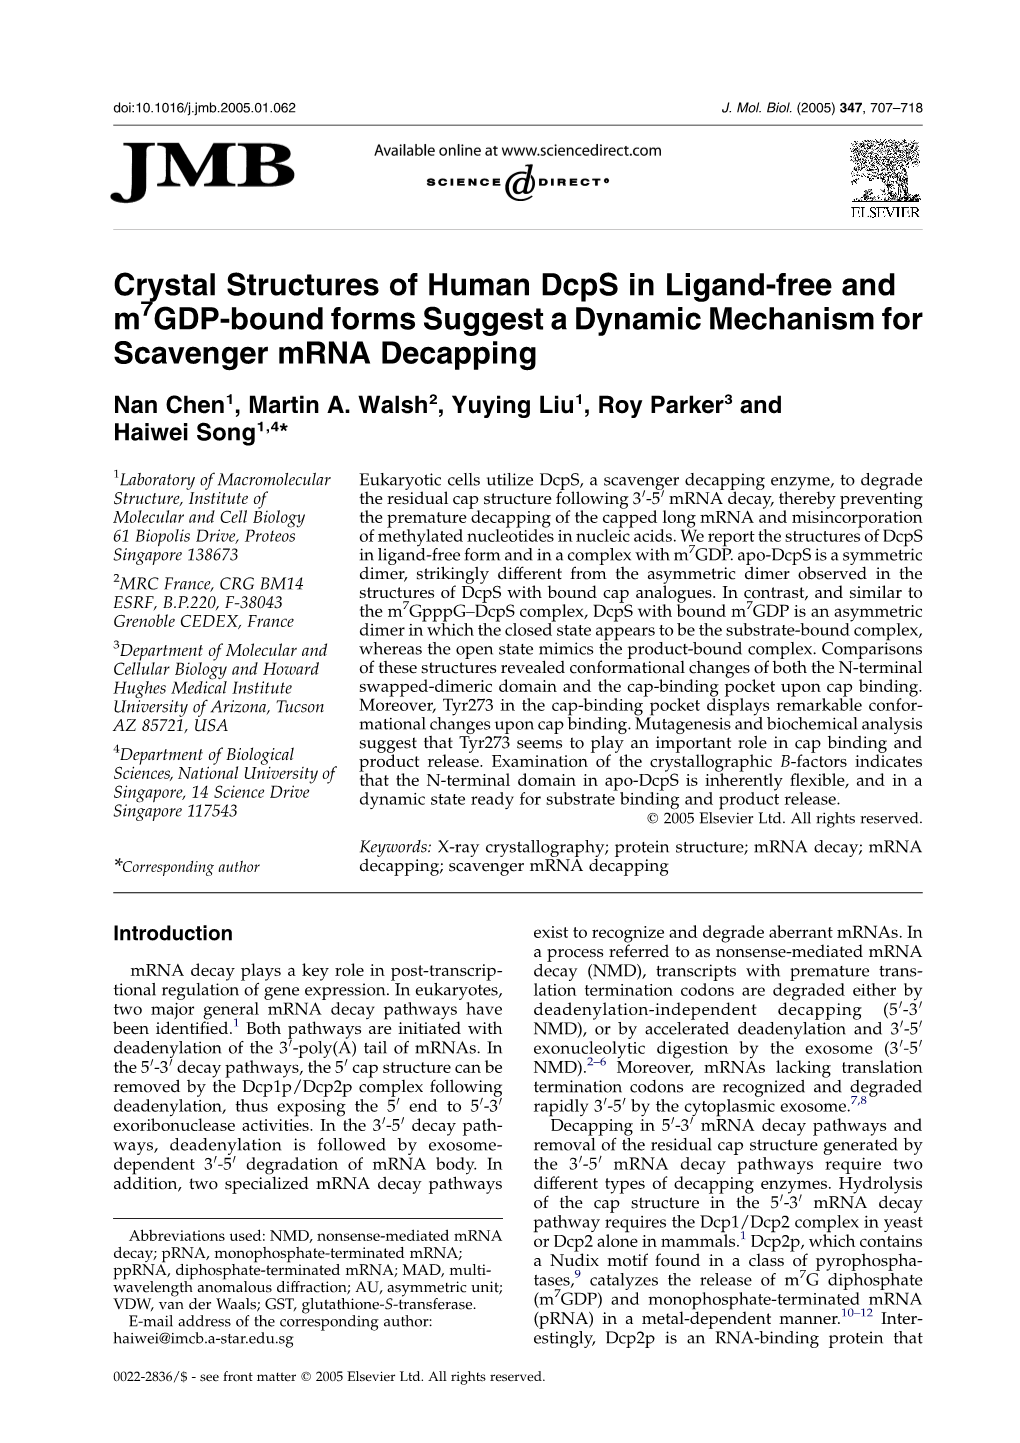 Crystal Structures of Human Dcps in Ligand-Free and M7gdp-Bound Forms Suggest a Dynamic Mechanism for Scavenger Mrna Decapping